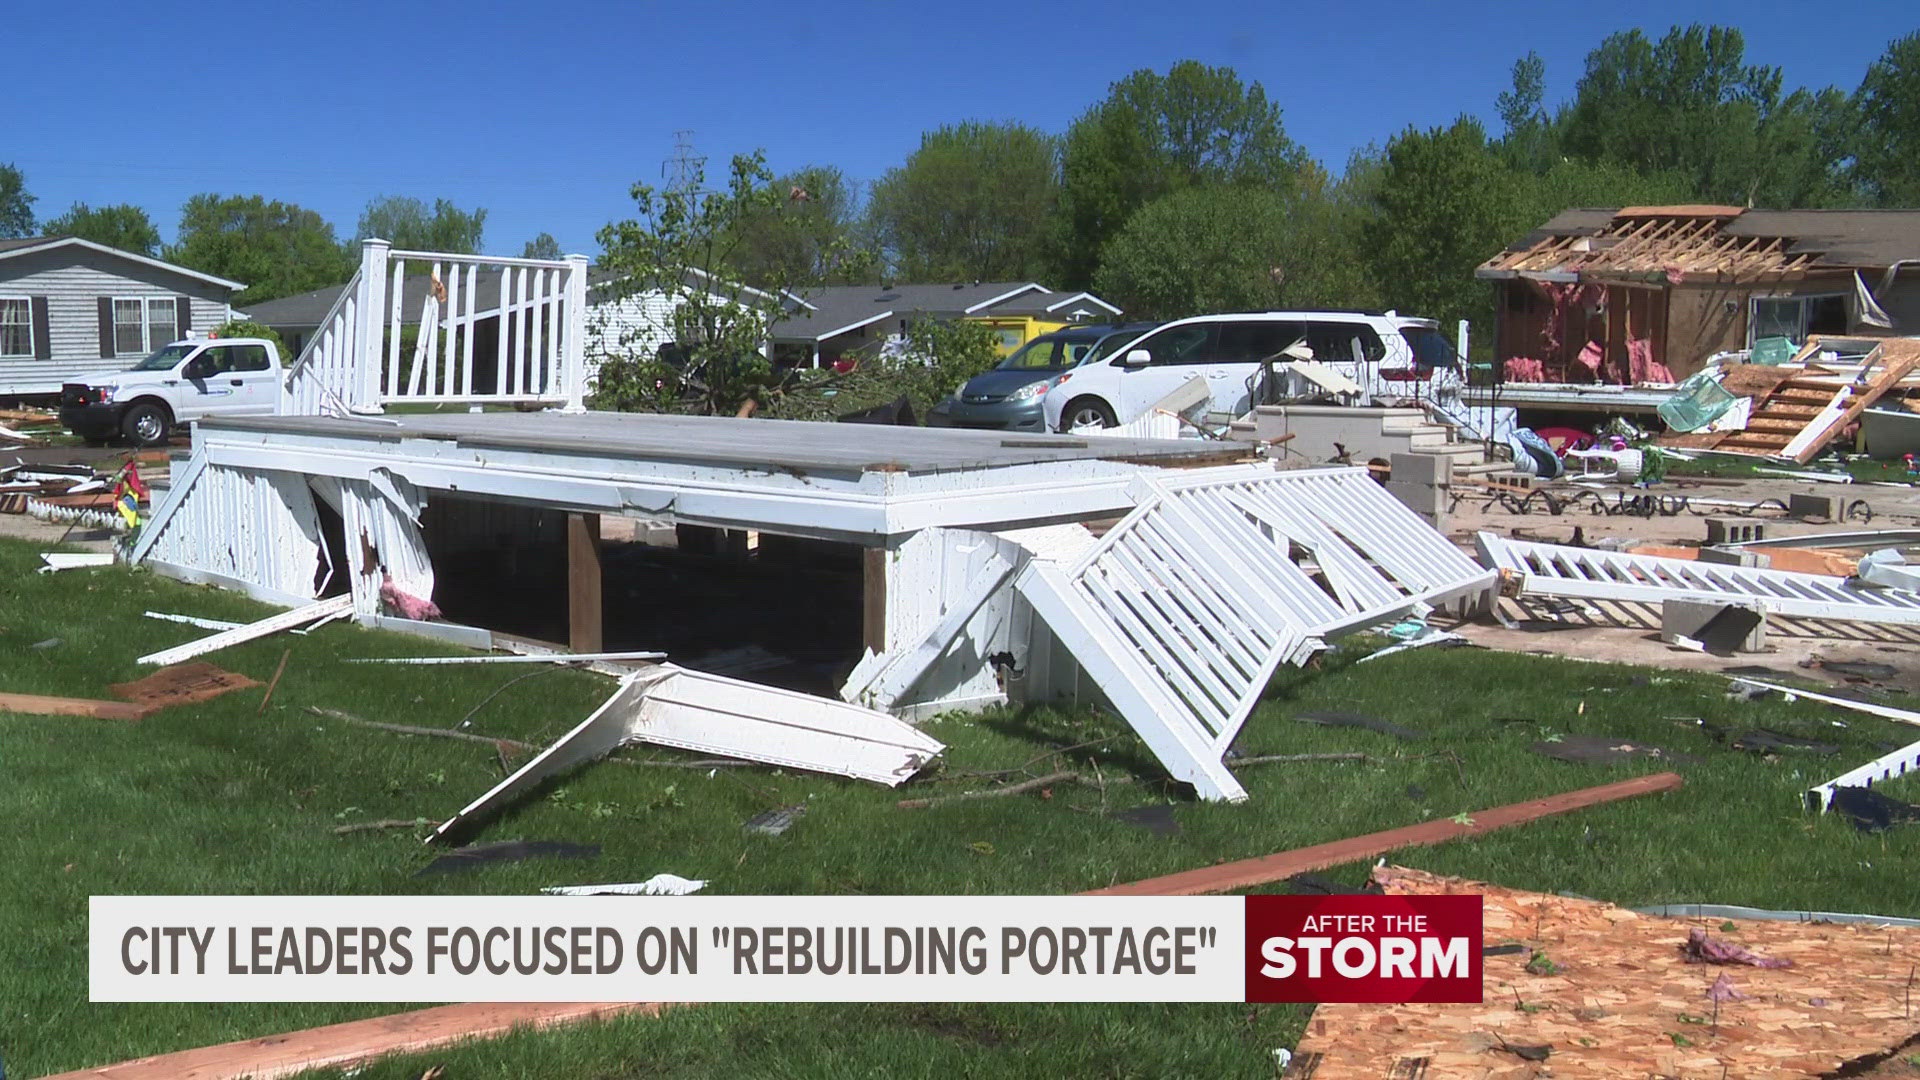 Portage was hit with one confirmed tornado Tuesday evening.